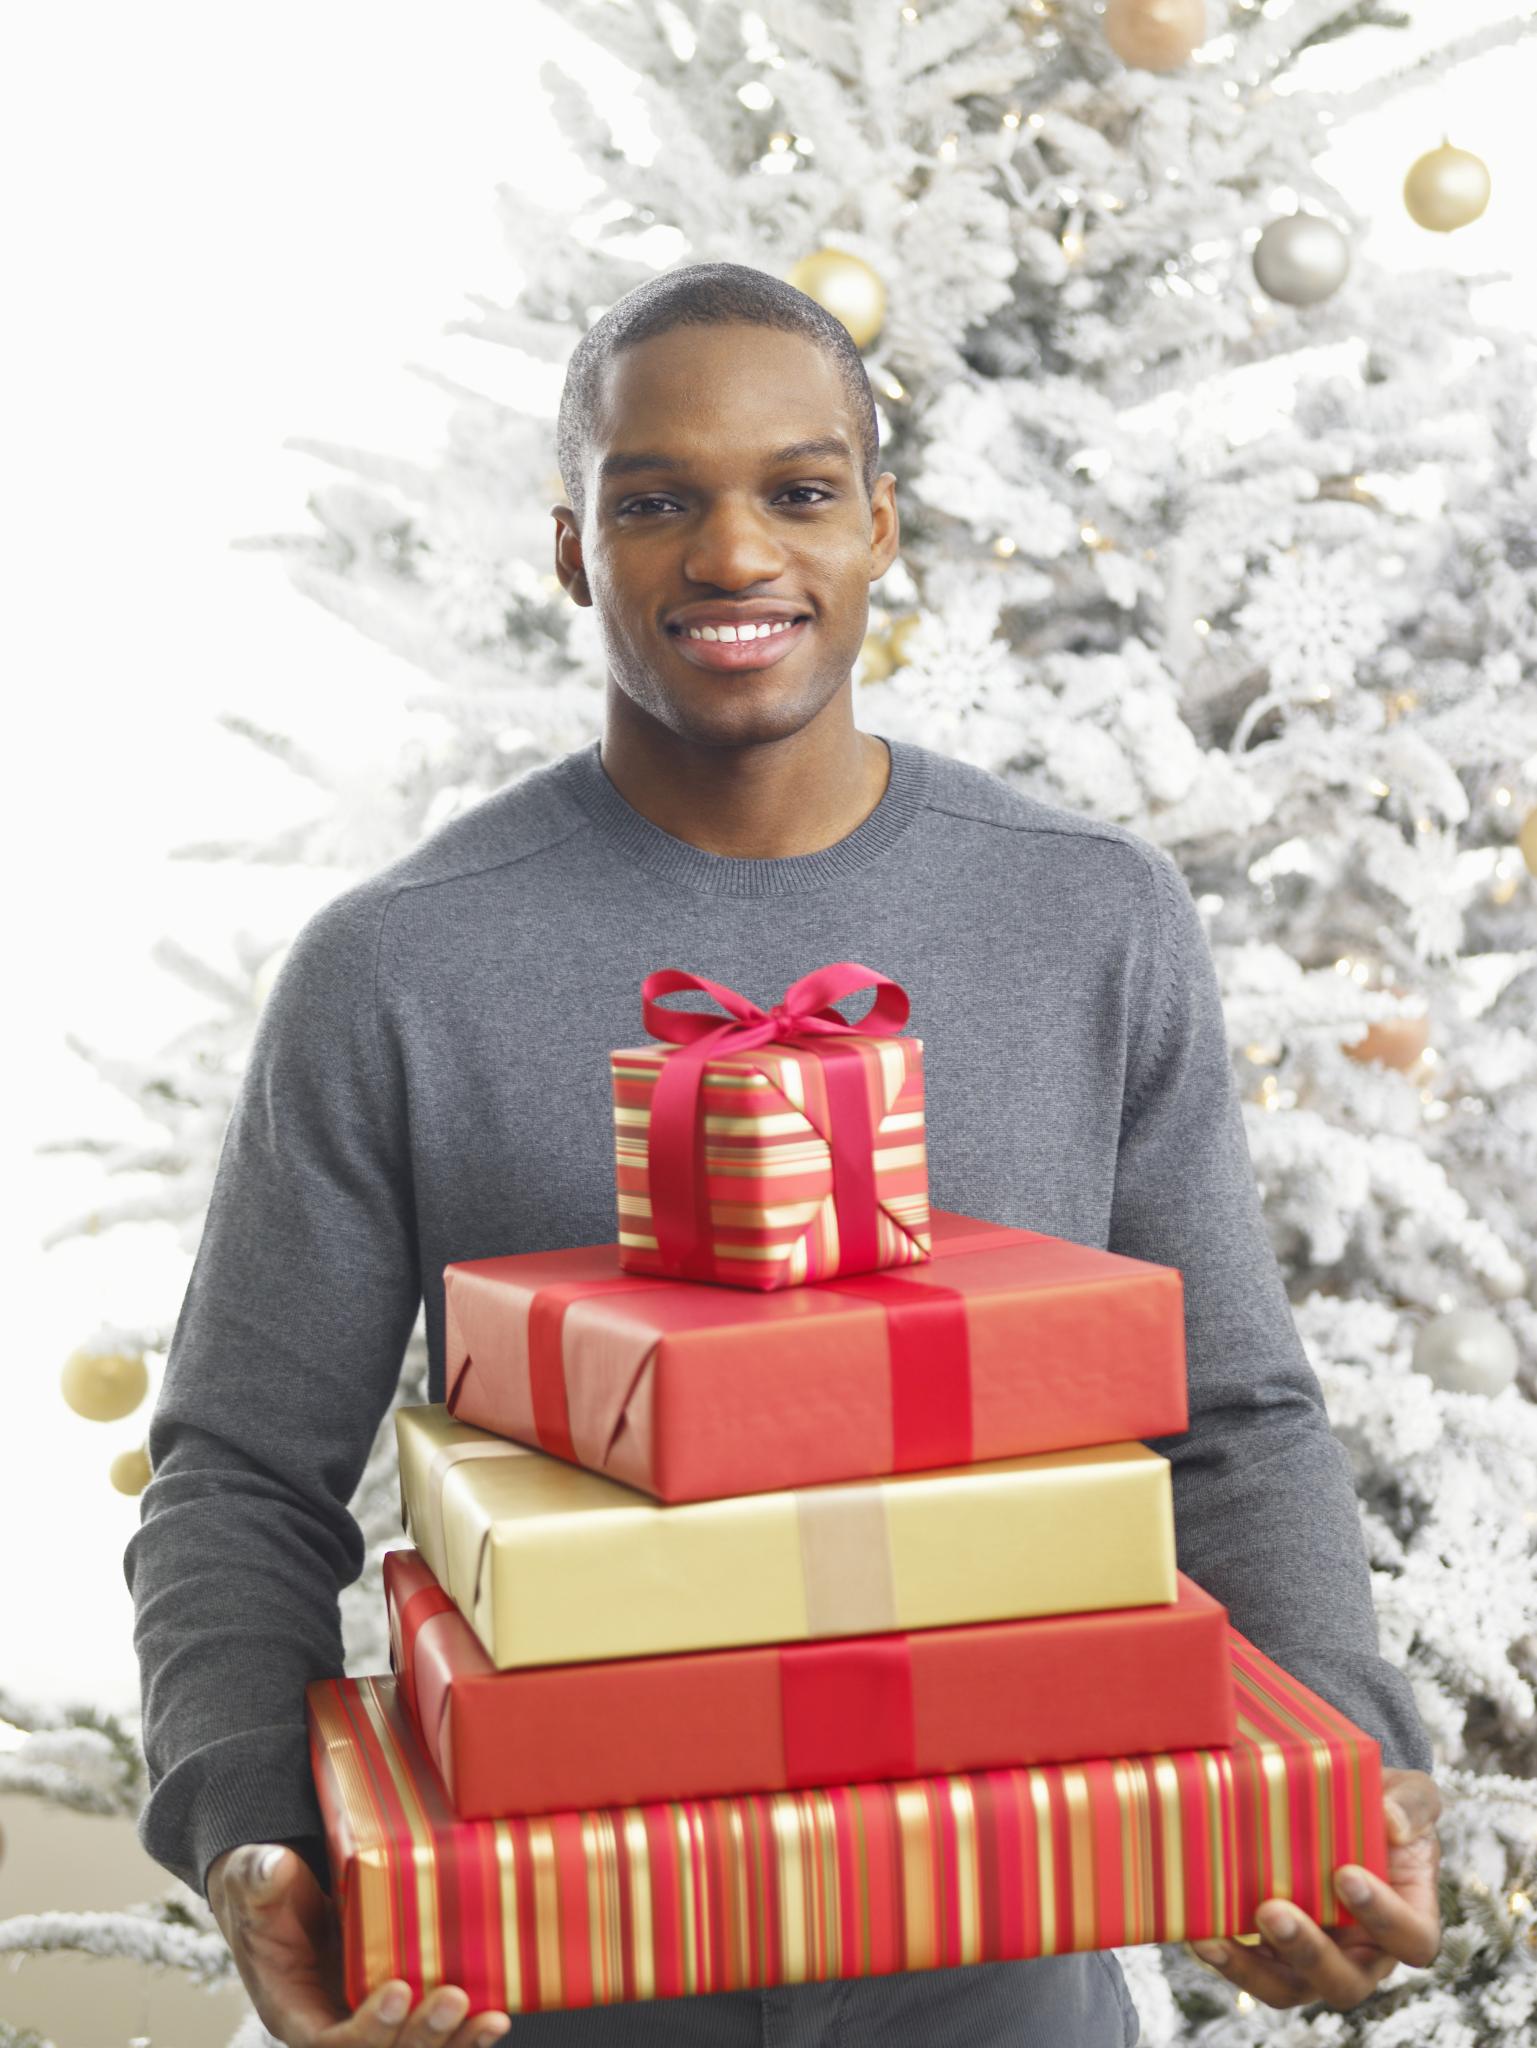 Holiday Gift Guide 2015: What To Get Him (Based On Your Relationship Status)